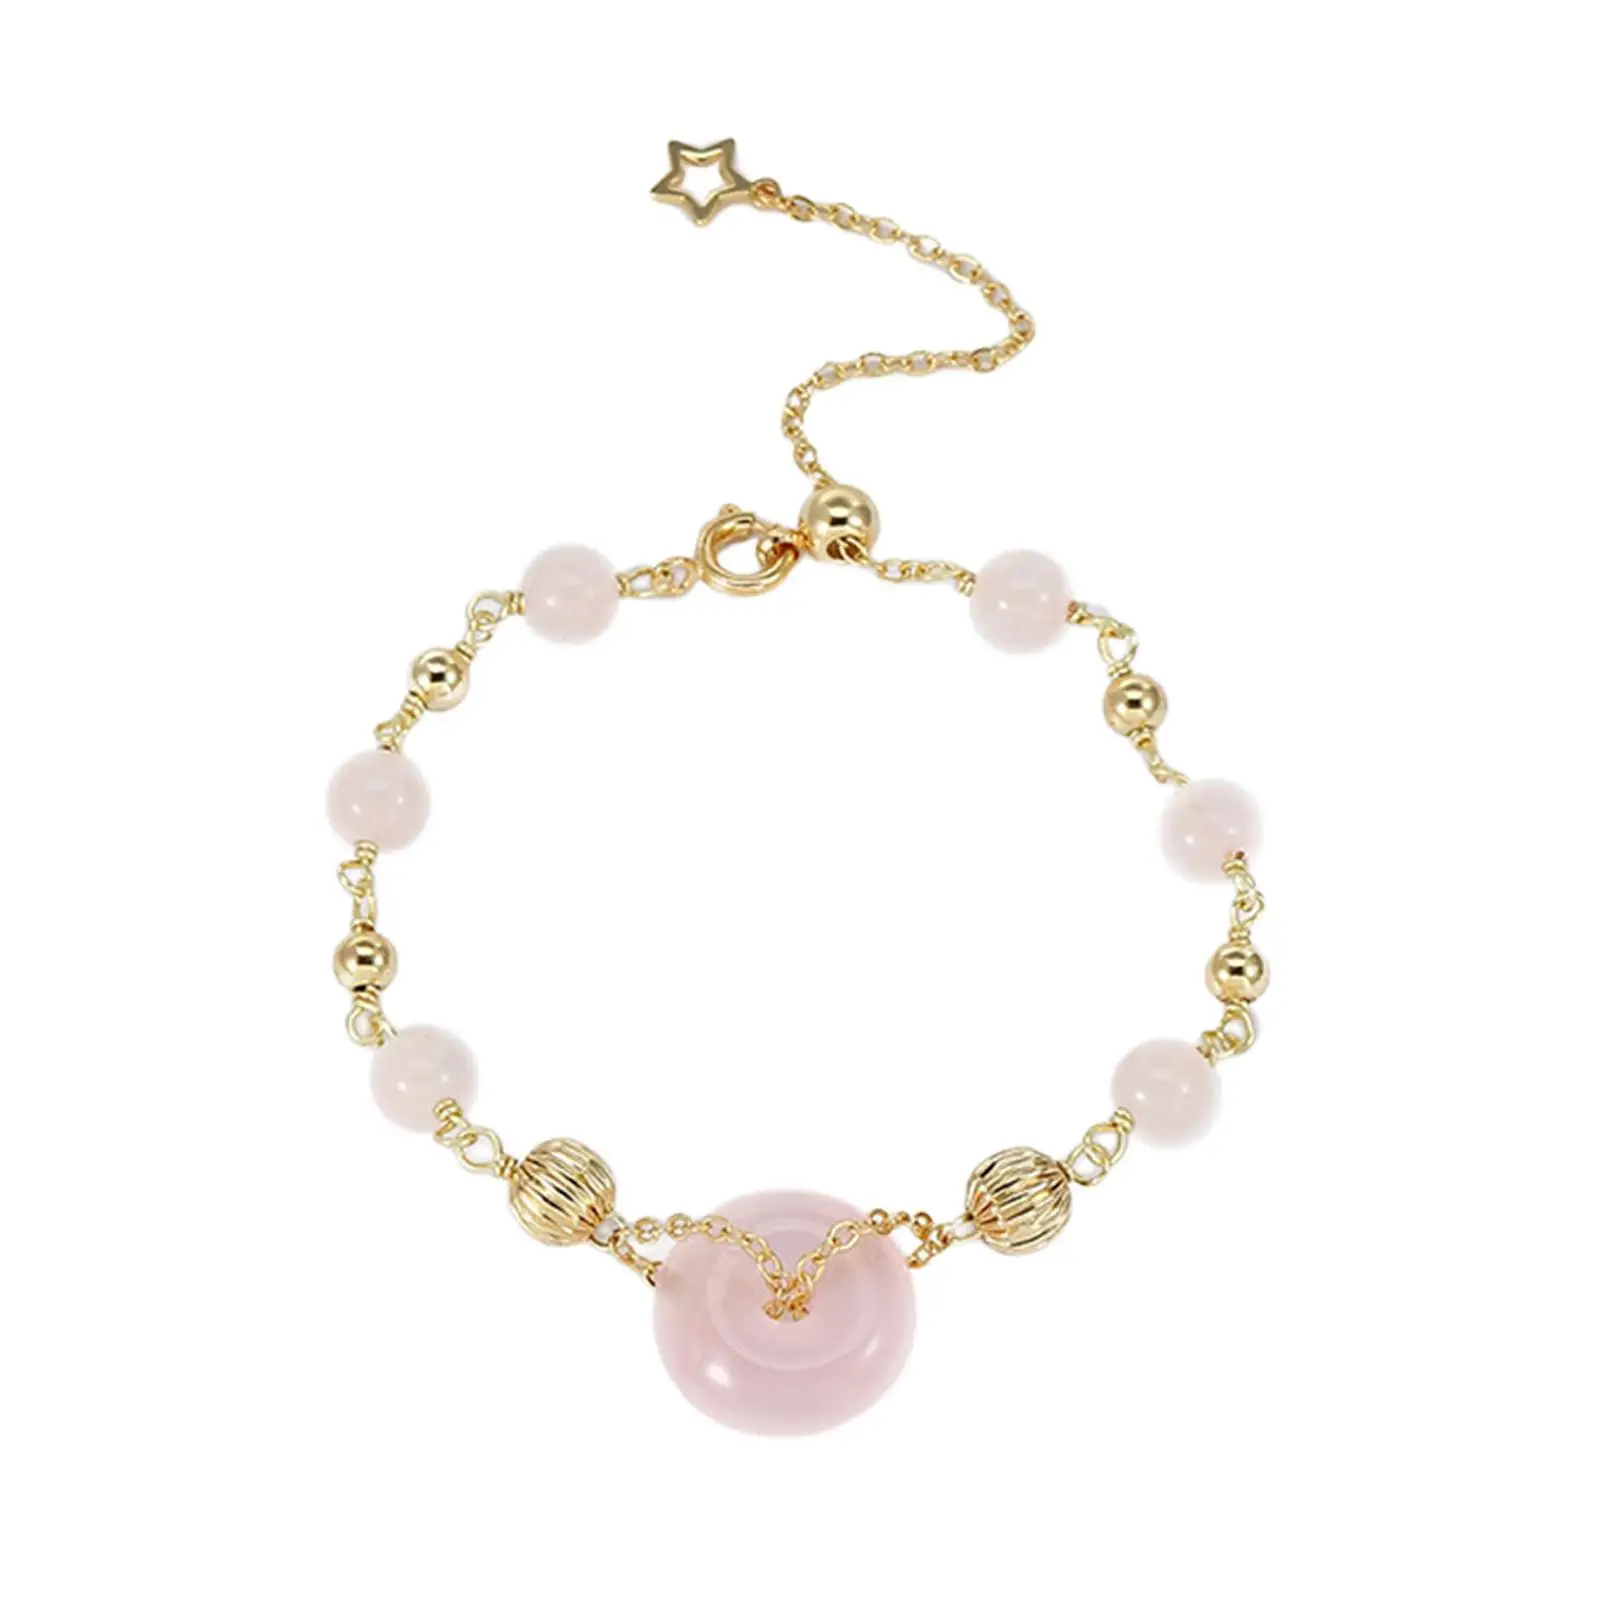 Classic Pink Beads Bracelet Charm Decorative Delicate for Different Ages